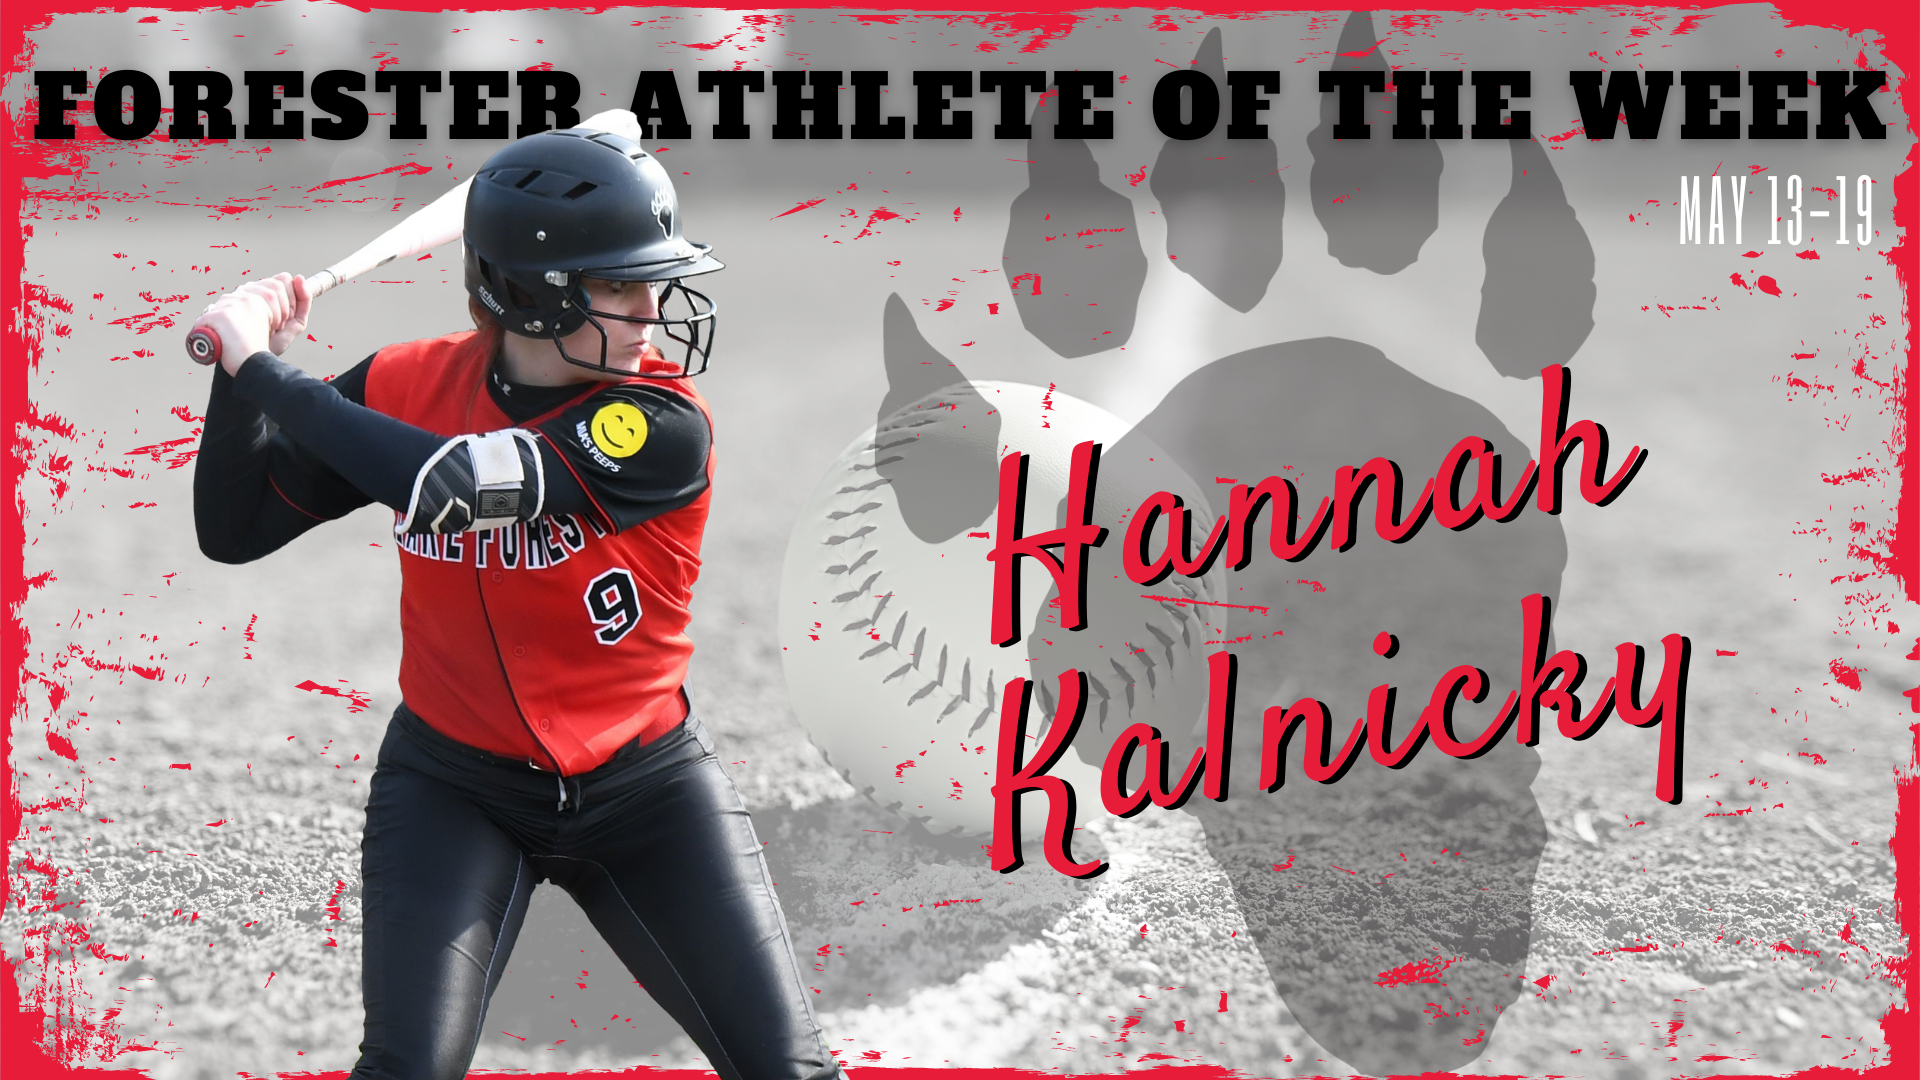 Hannah Kalnicky Named Forester Athlete of the Week